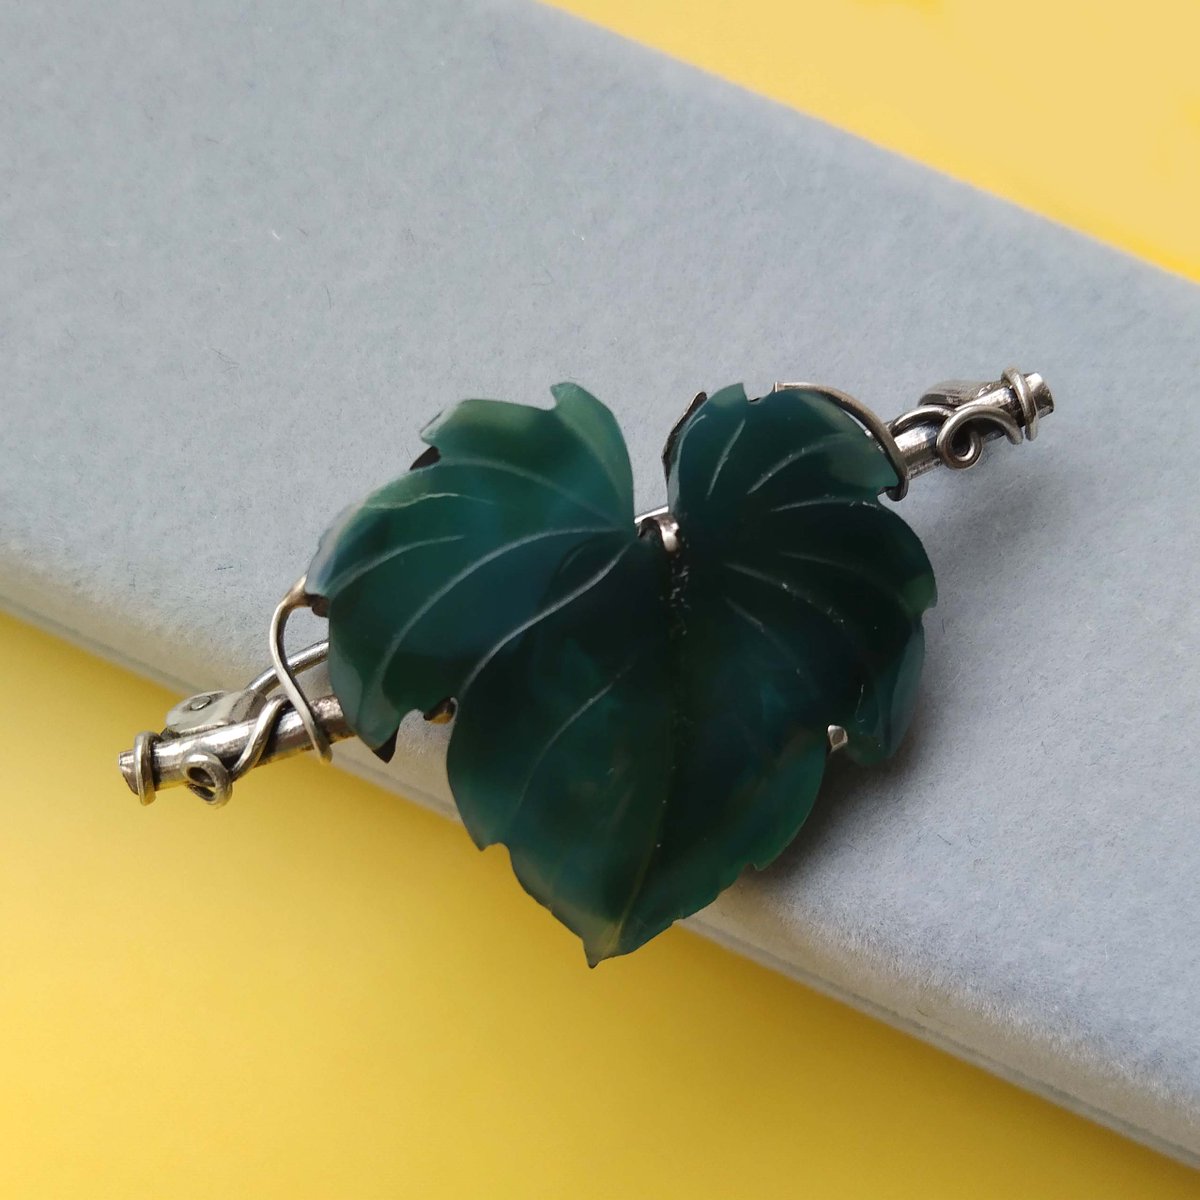 sochicfinds.com/products/antiq…
Antique Carved Green Agate Brooch, Sterling Silver Leaf Pin, Art Nouveau Jewelry #AntiqueBrooch #AgateBrooch, #SterlingSilverBrooch #LeafPin, #ArtNouveauJewelry